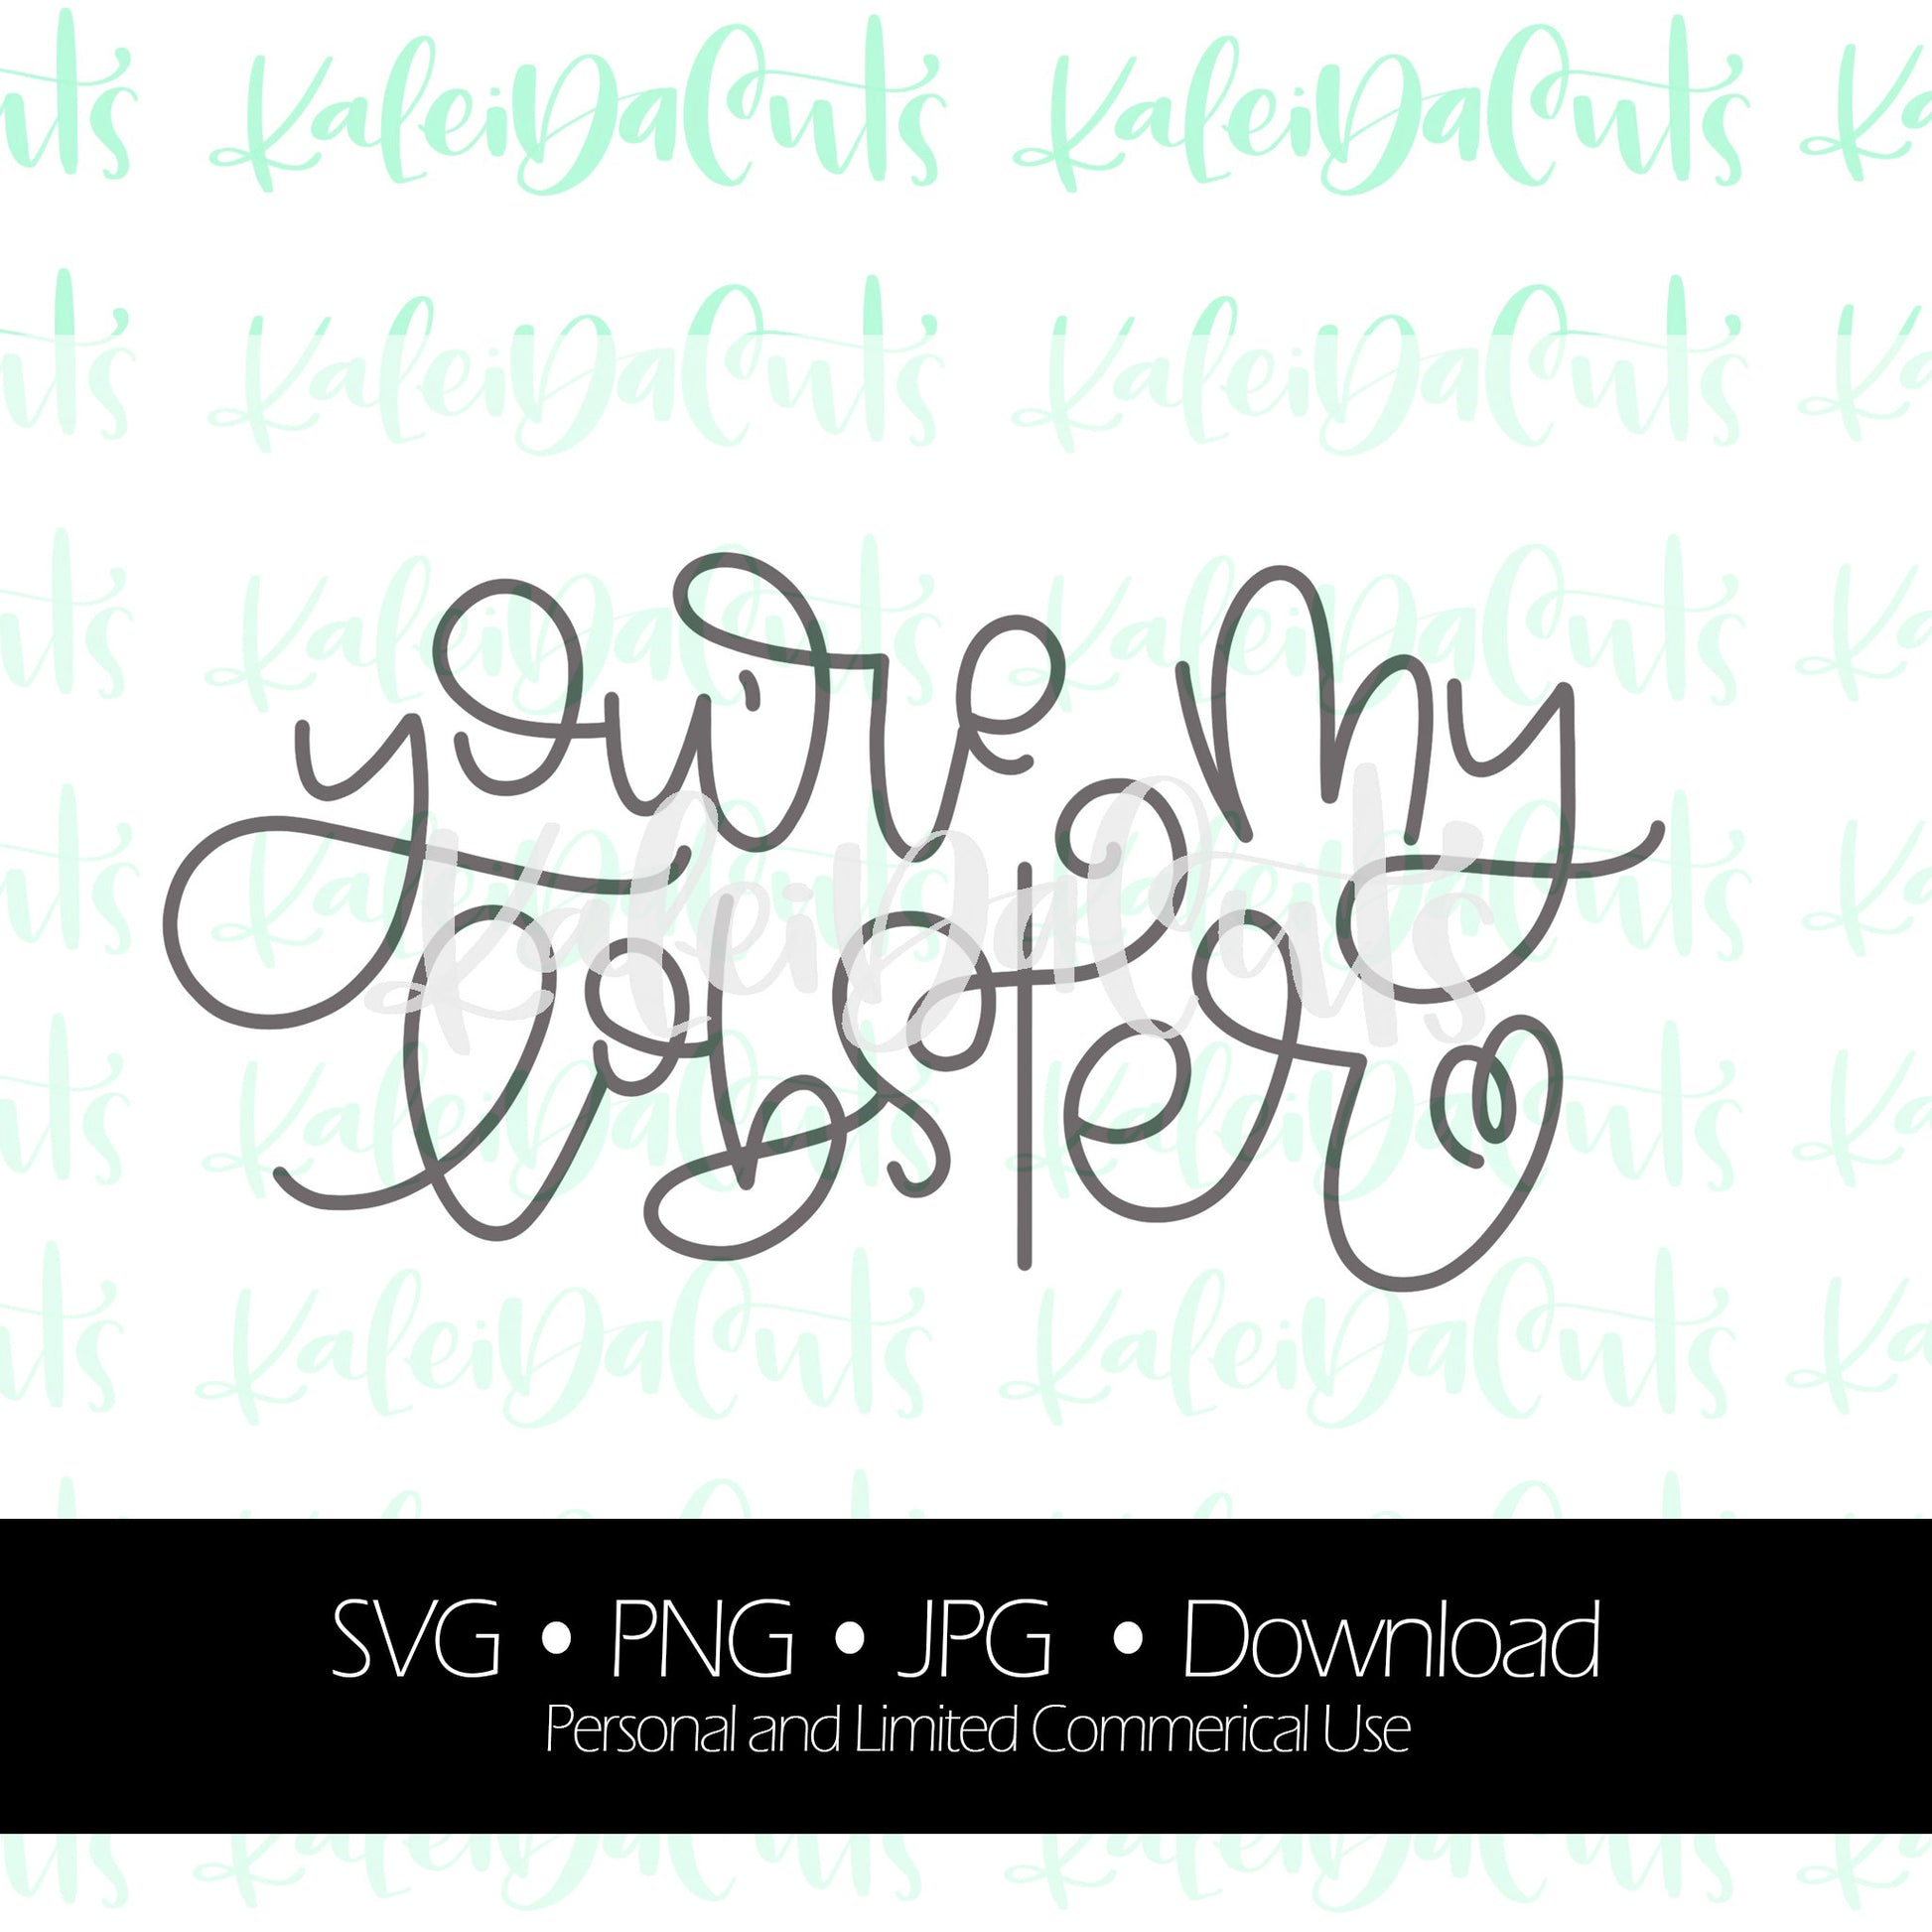 You're My Lobster Lettering. SVG. Personal and Limited Commercial Use. KaleidaCuts Handlettering.